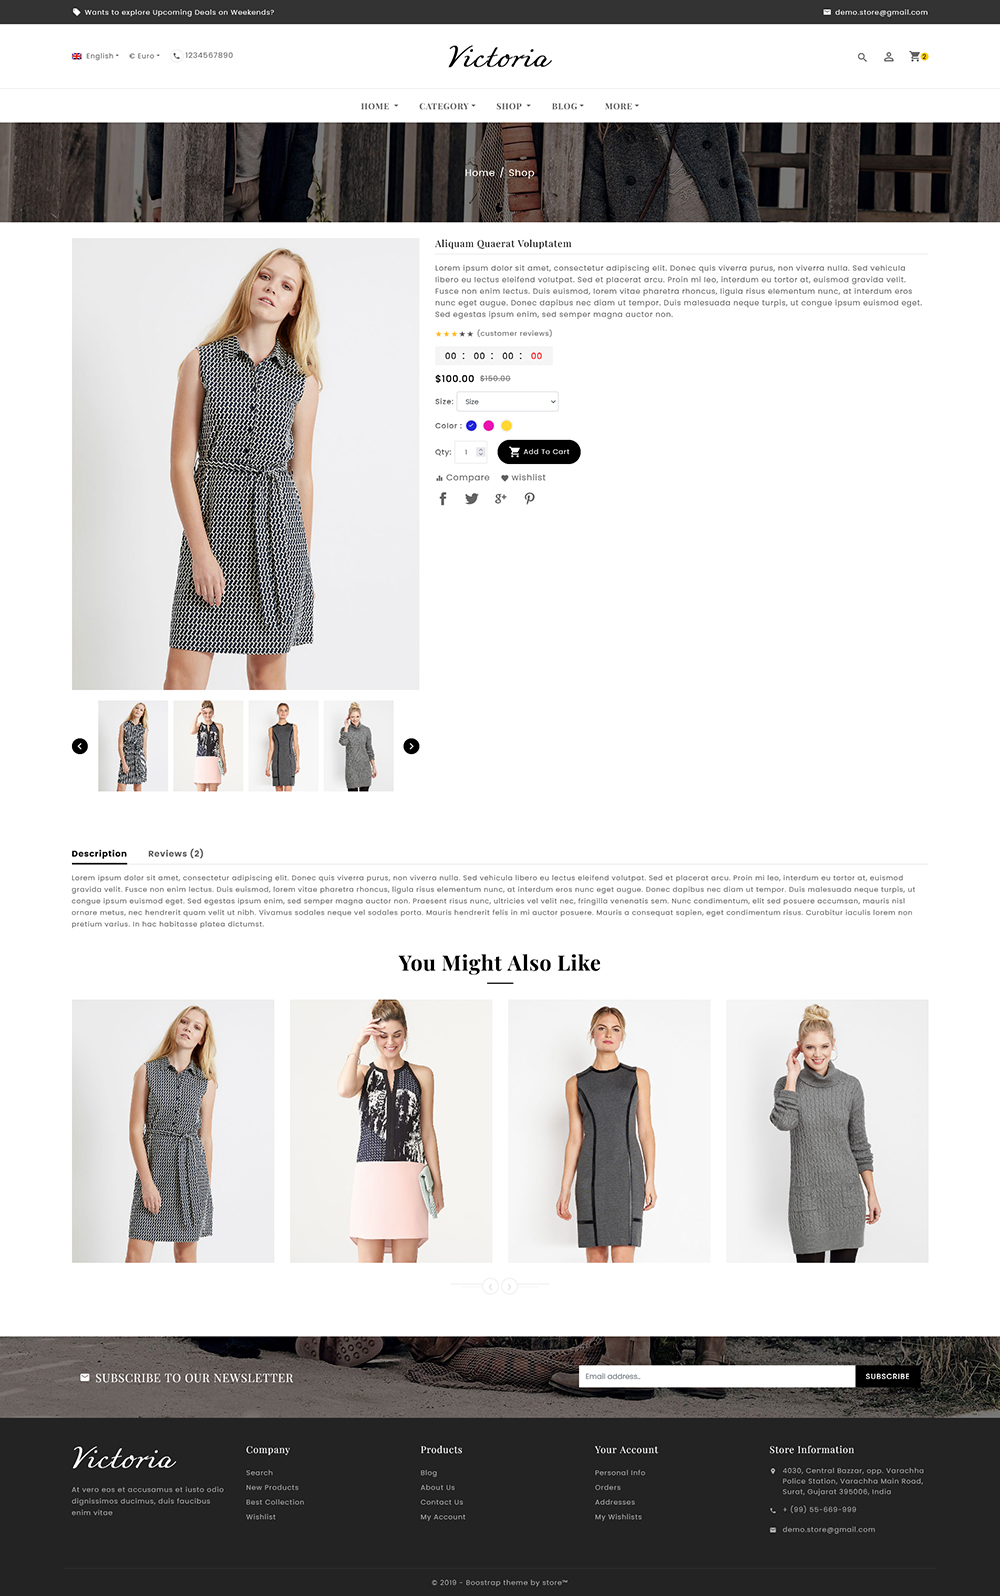 [Free] Victoria - Minimalist Ecommerce Psd Template For Online Fashion Store